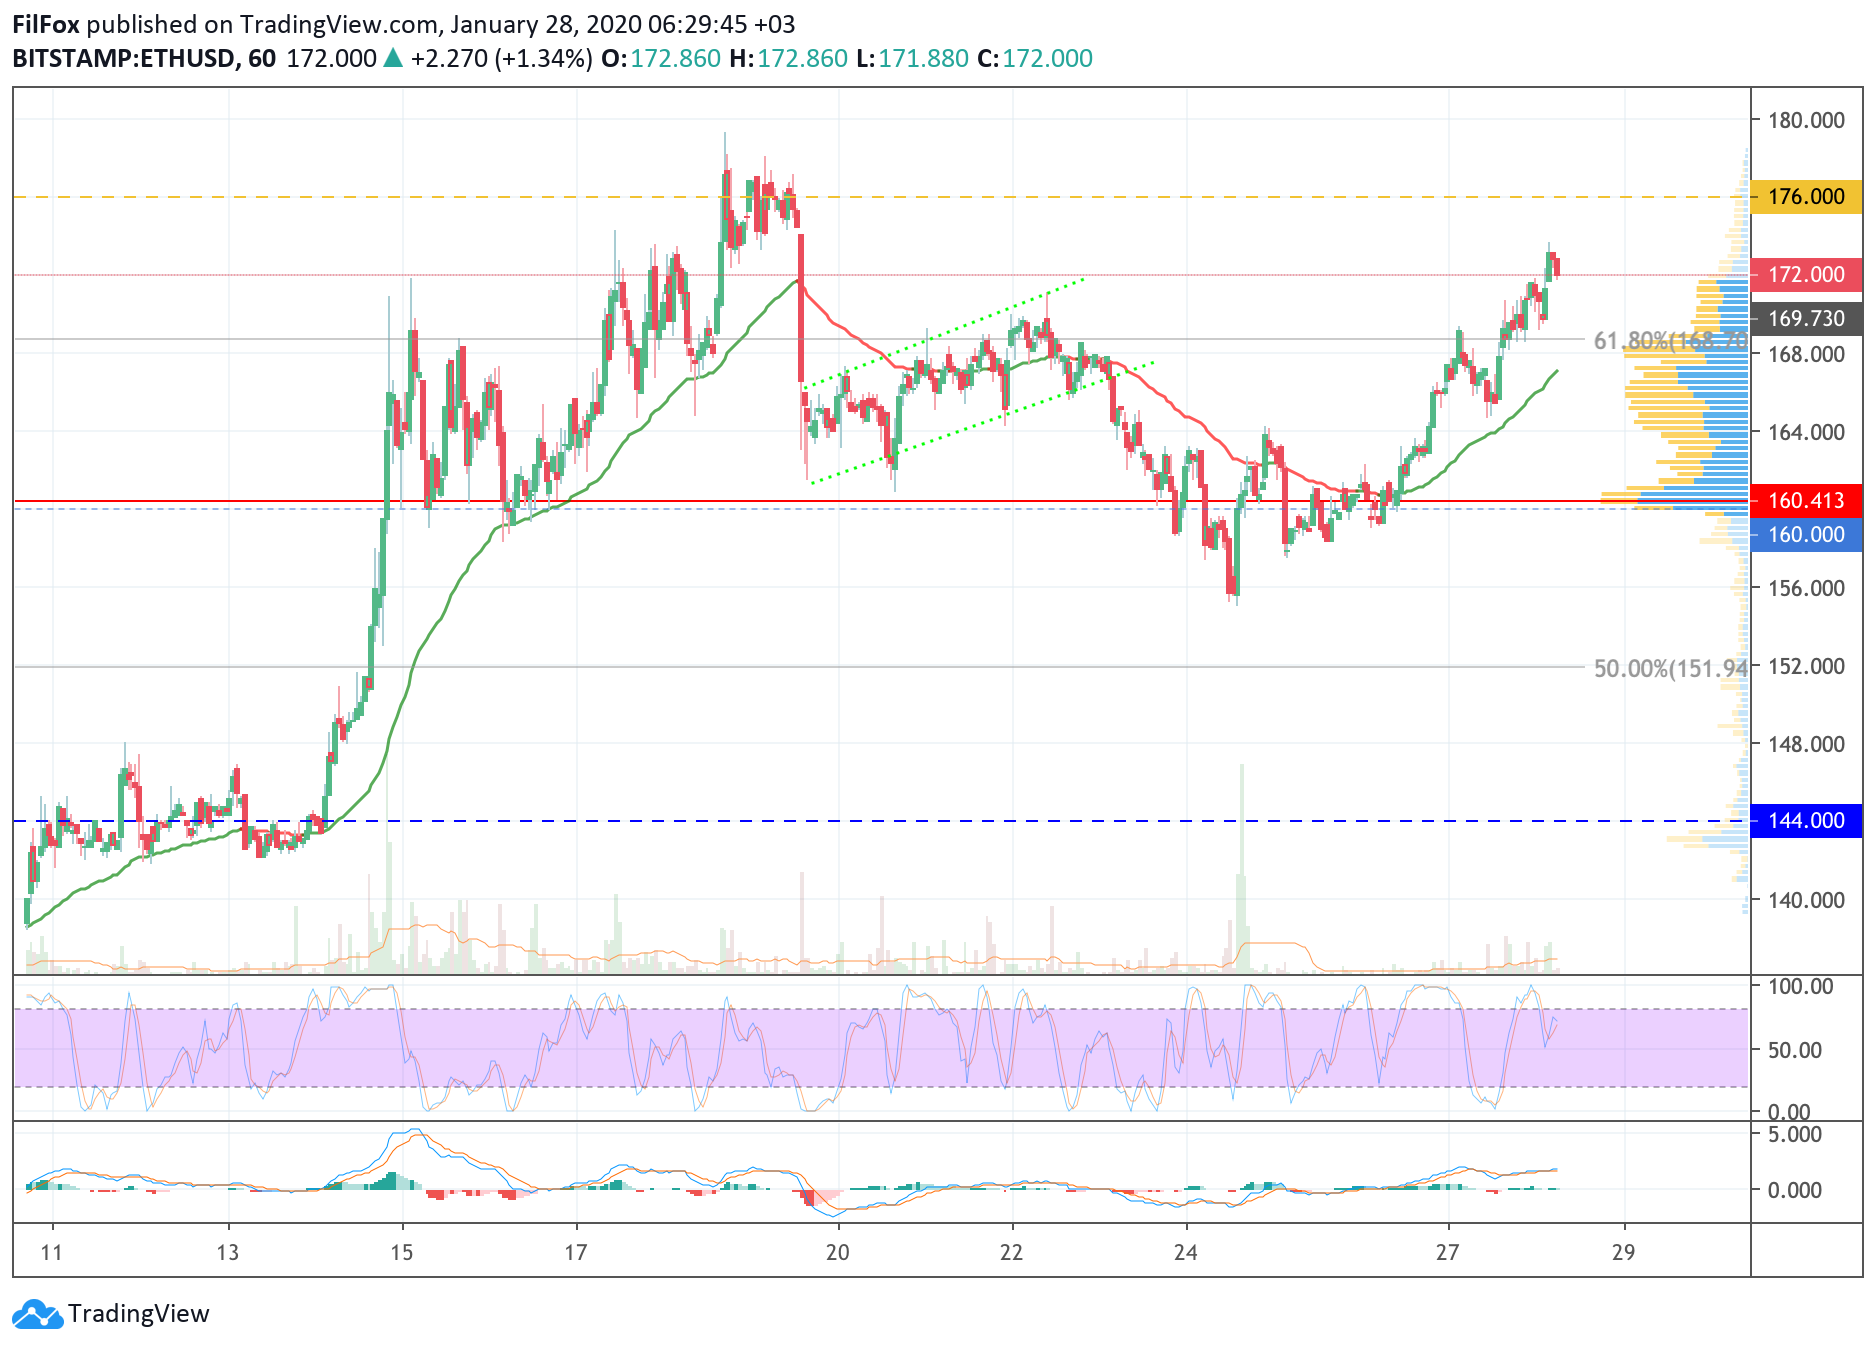 Analysis of cryptocurrency pairs BTC / USD, ETH / USD and XRP / USD on 01/28/2020